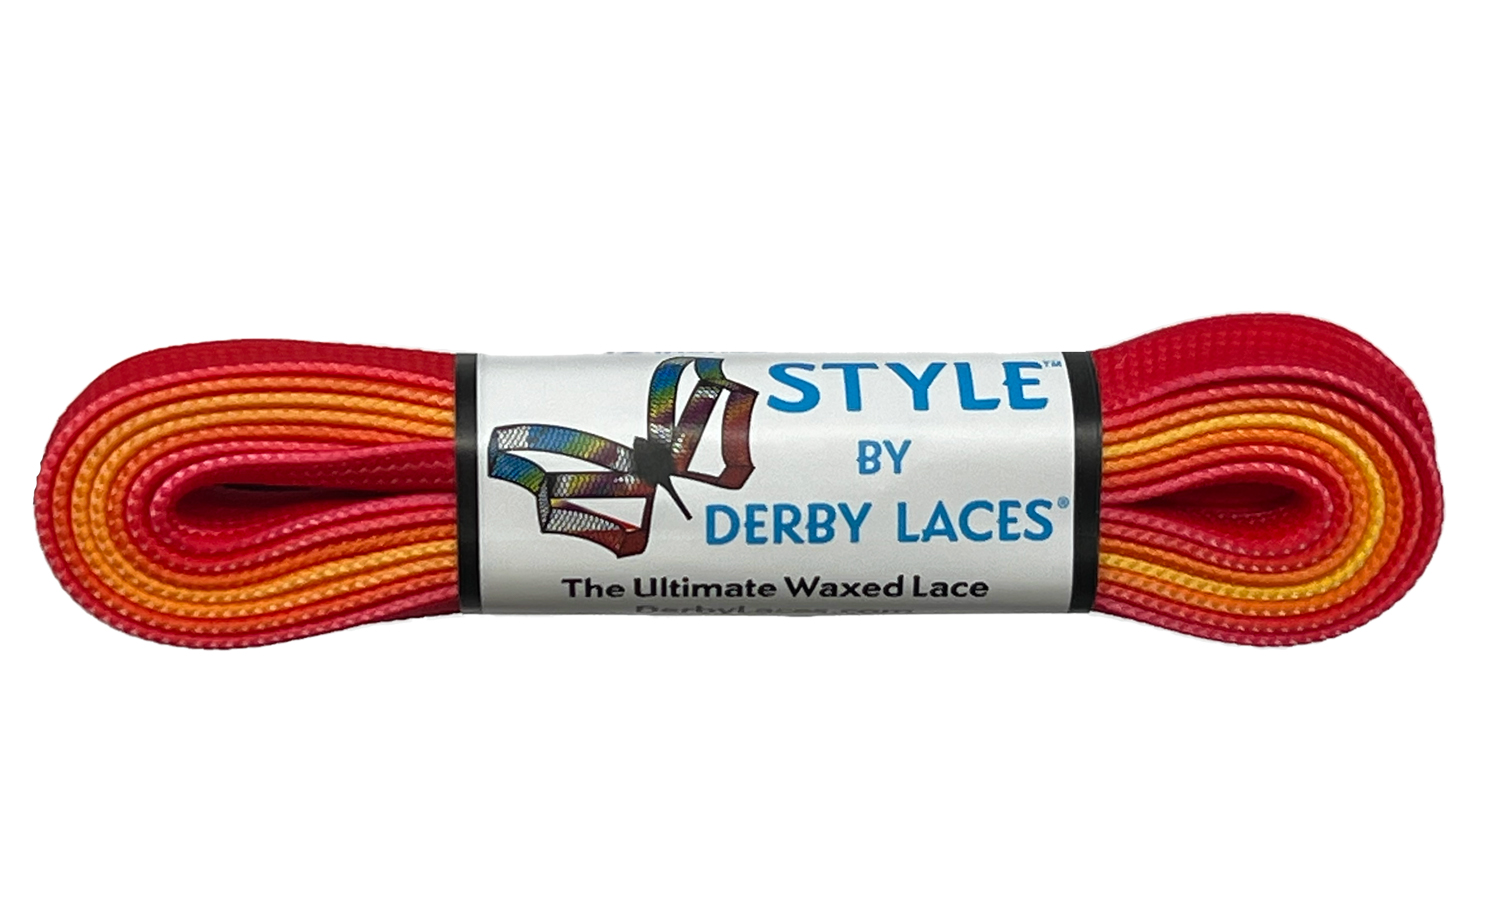 https://derbylaces.com/wp-content/uploads/DLYXX-OMBRE-RED-YELLOW.jpg